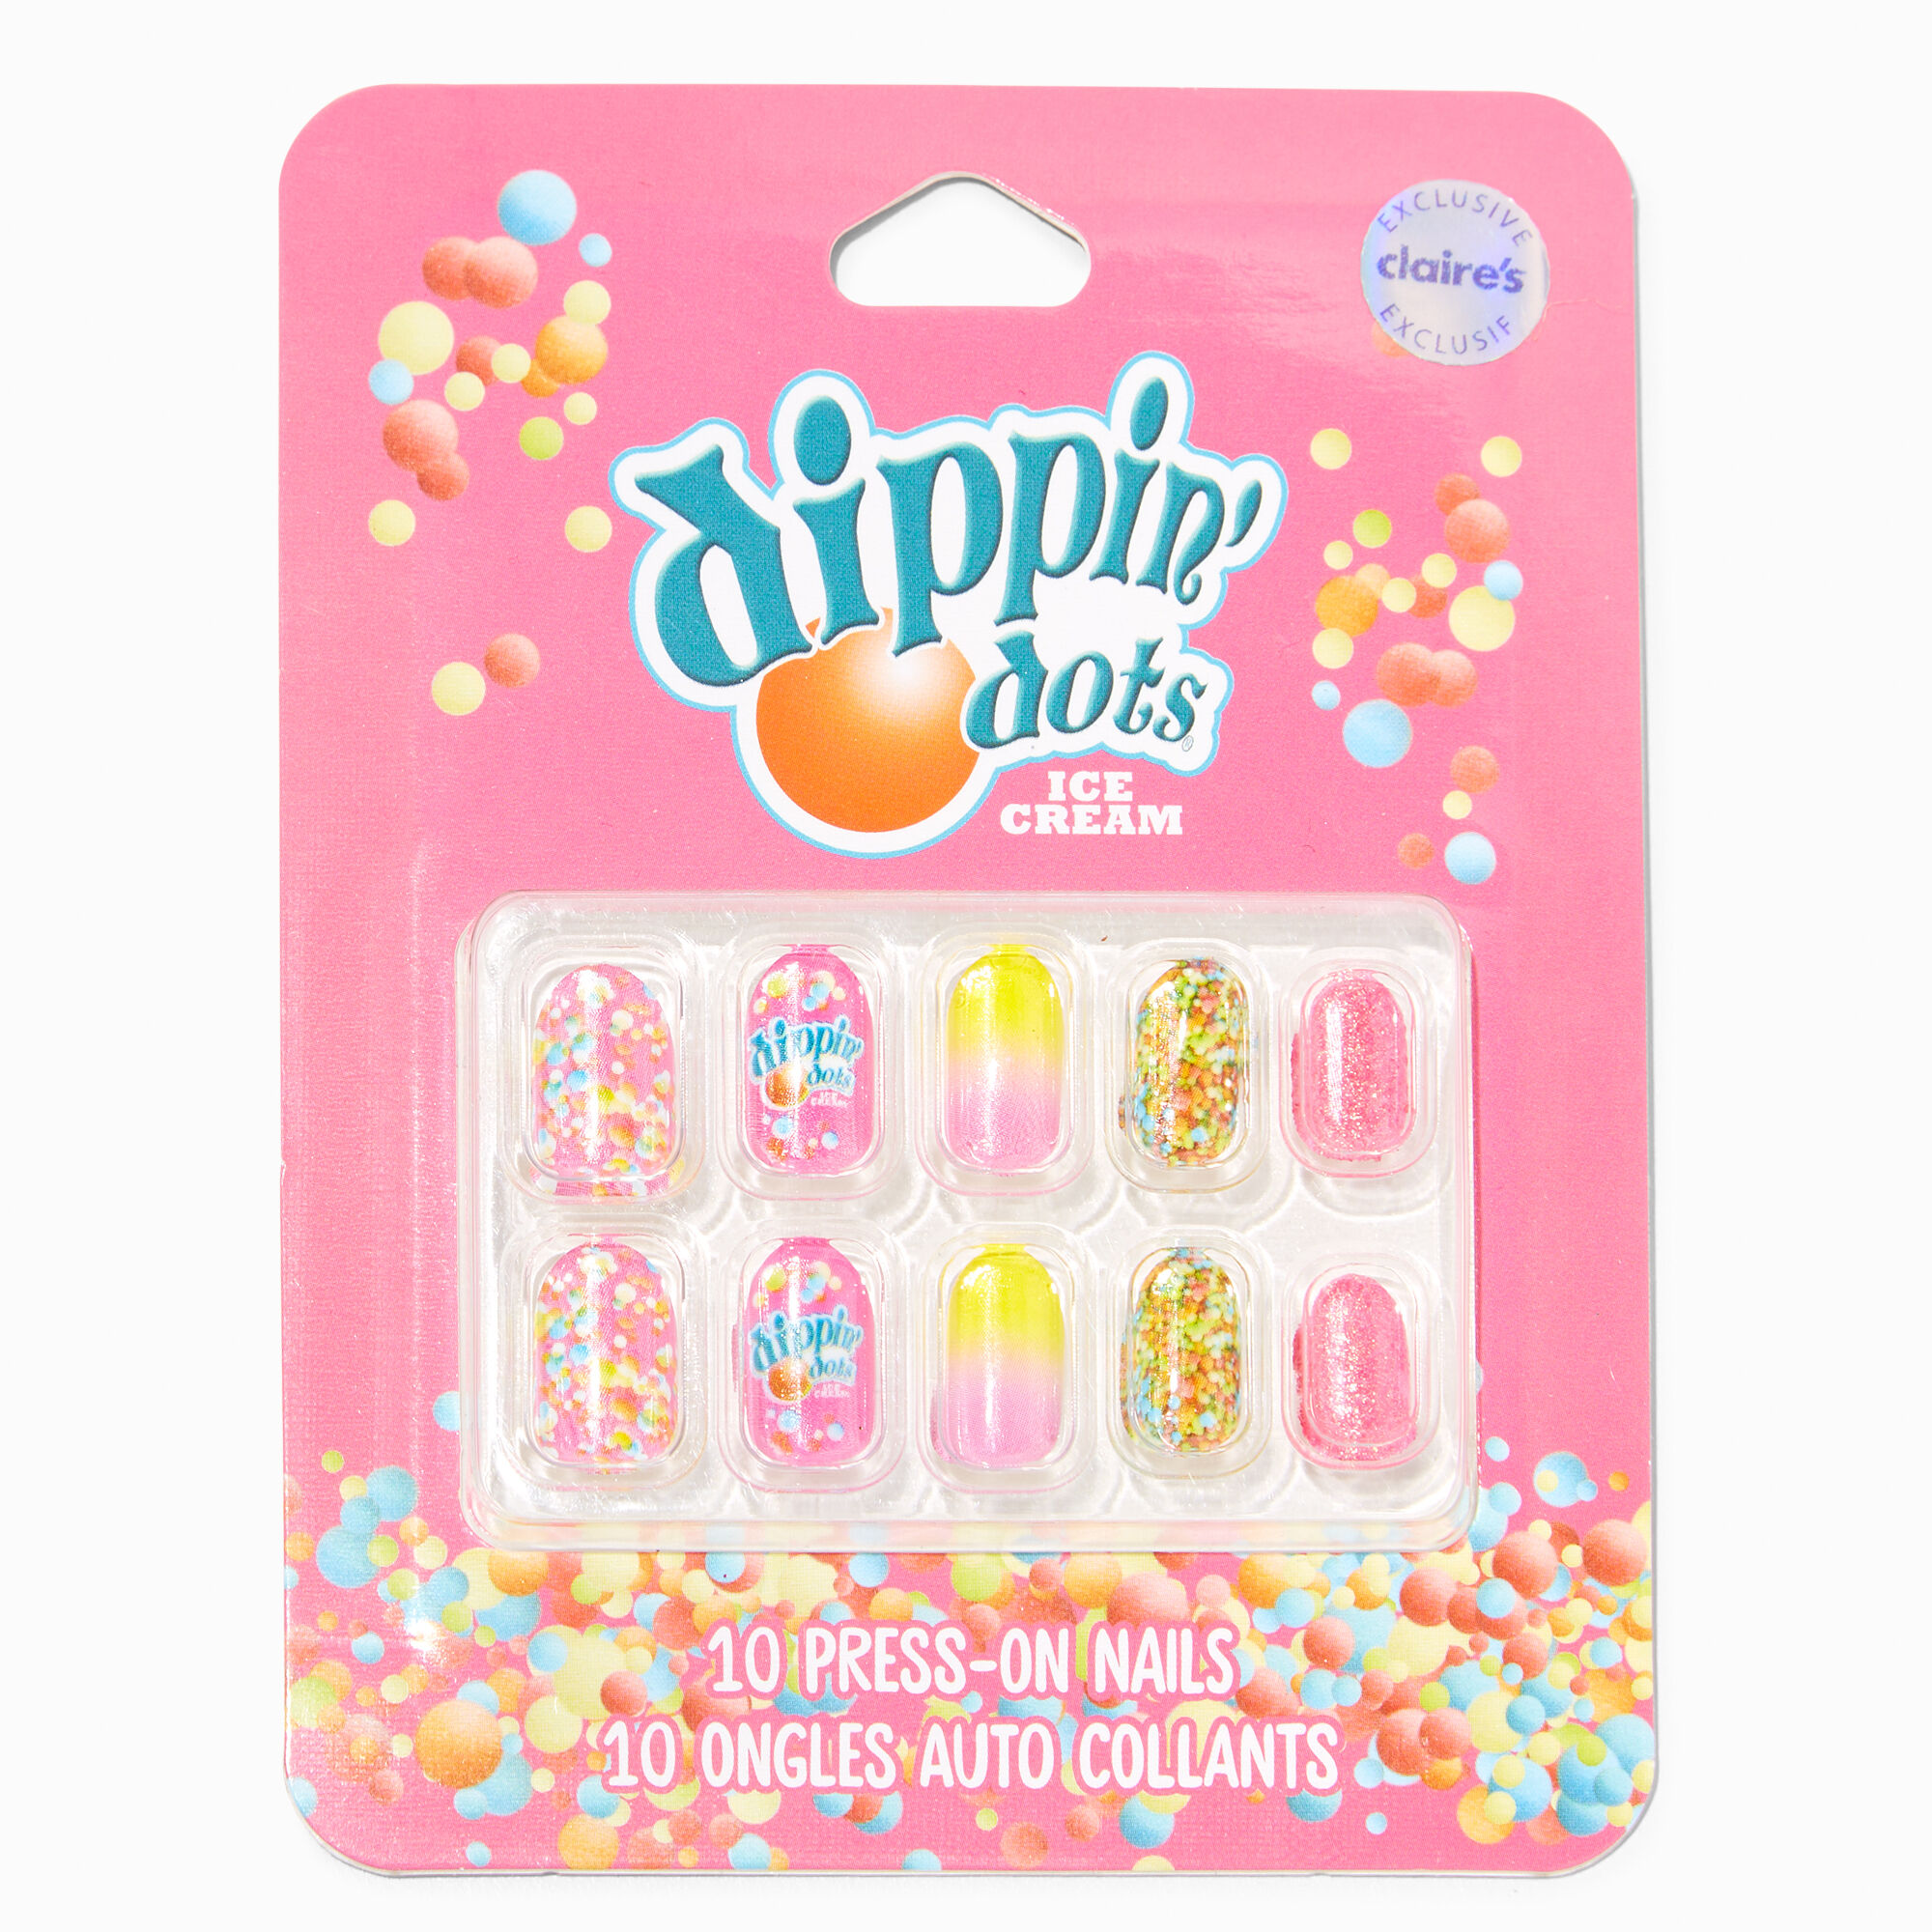 View Dippin Dots Claires Exclusive Stiletto Press On Vegan Faux Nail Set 10 Pack information